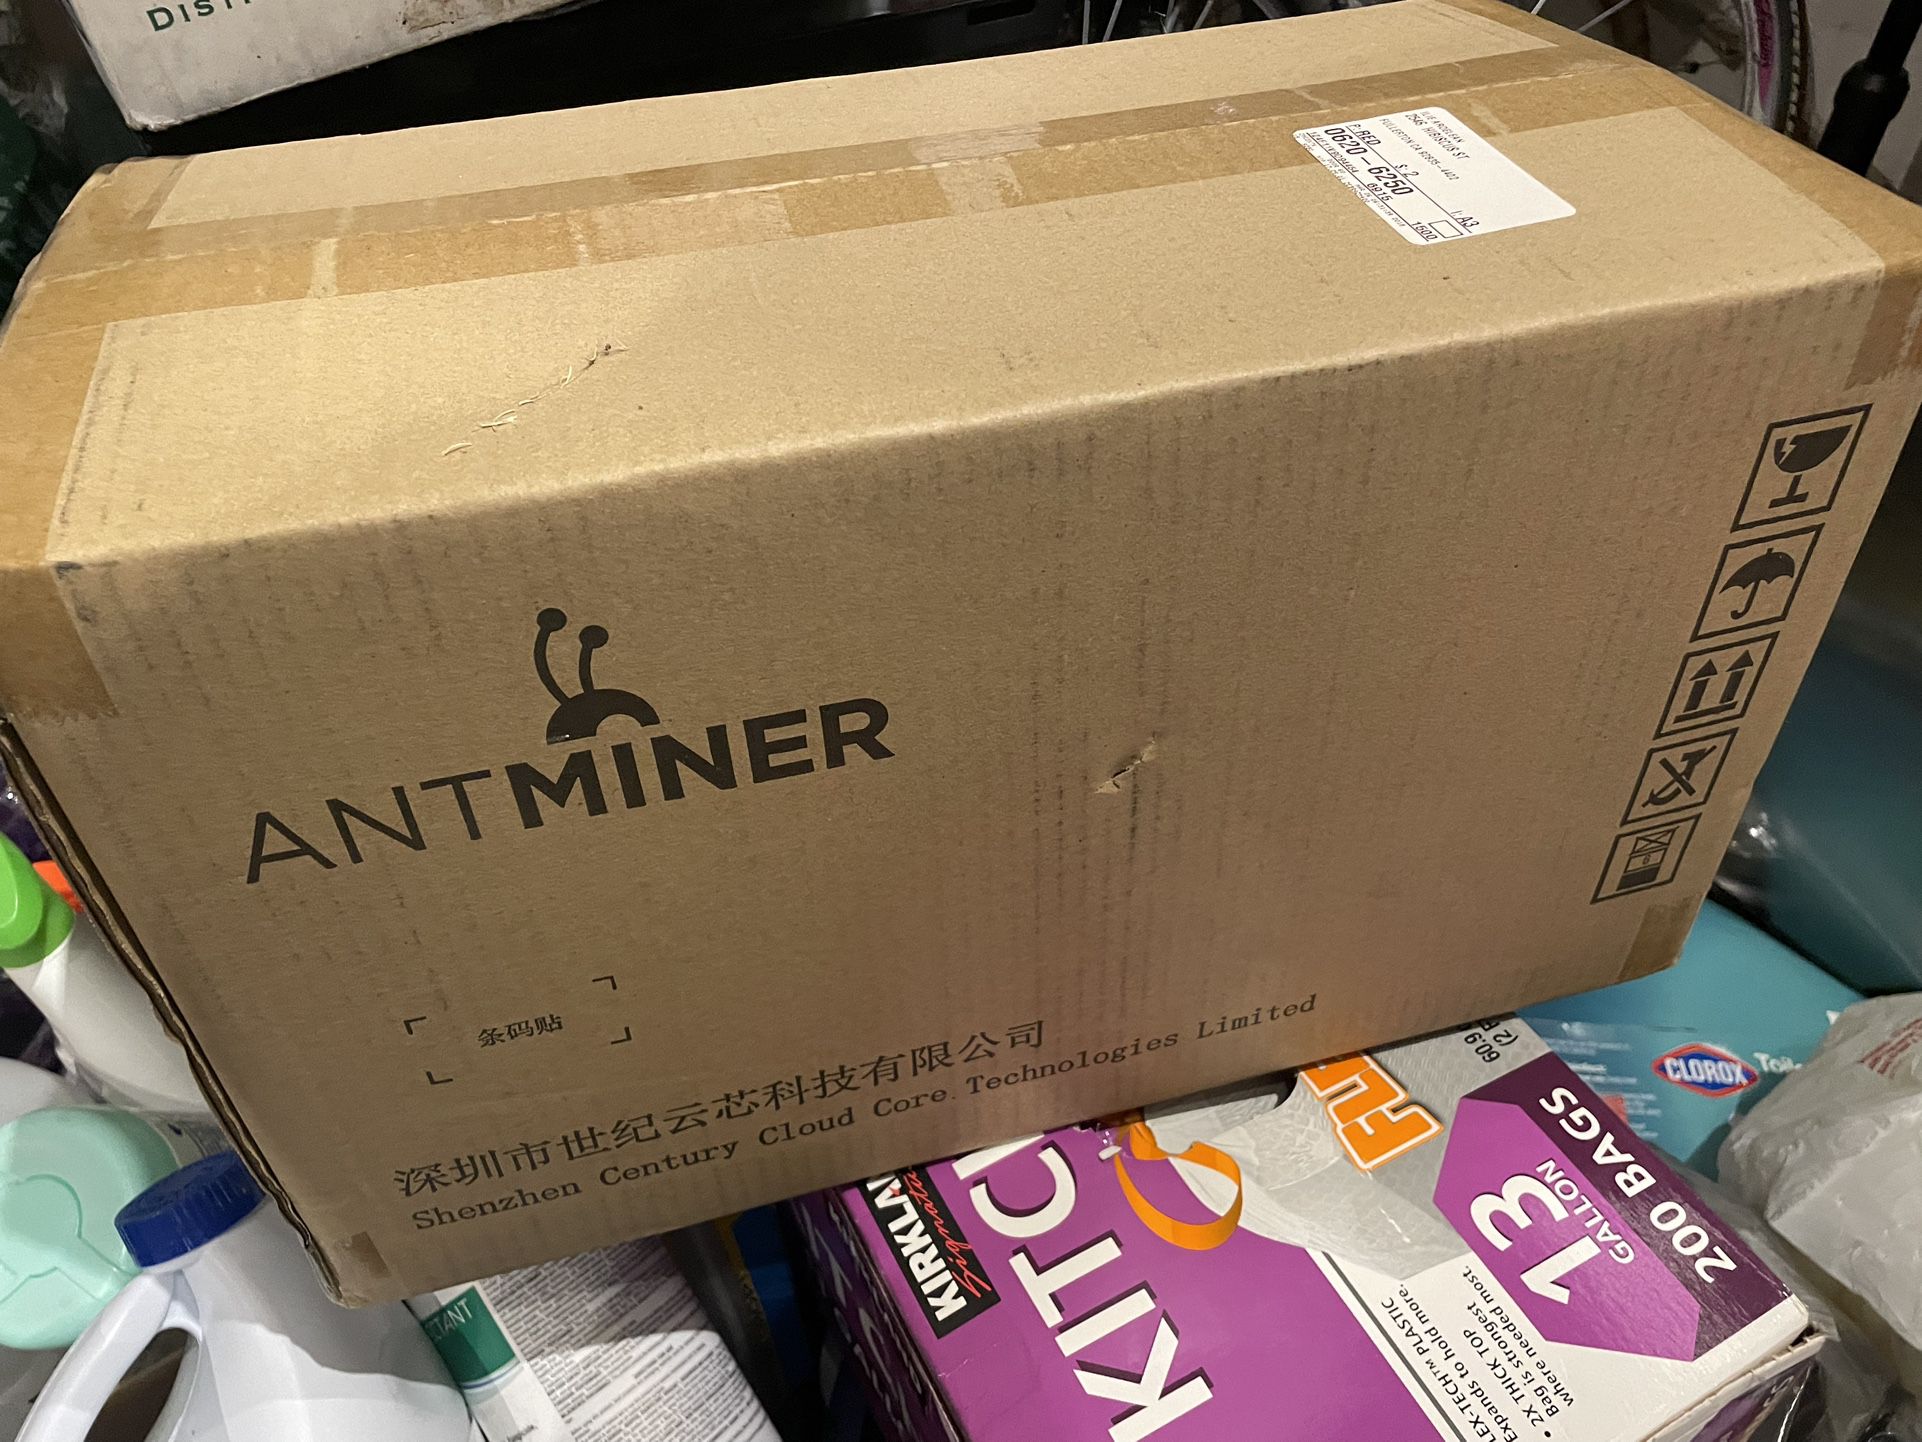 New - Antminer S9 13.5T - Never Opened Box 